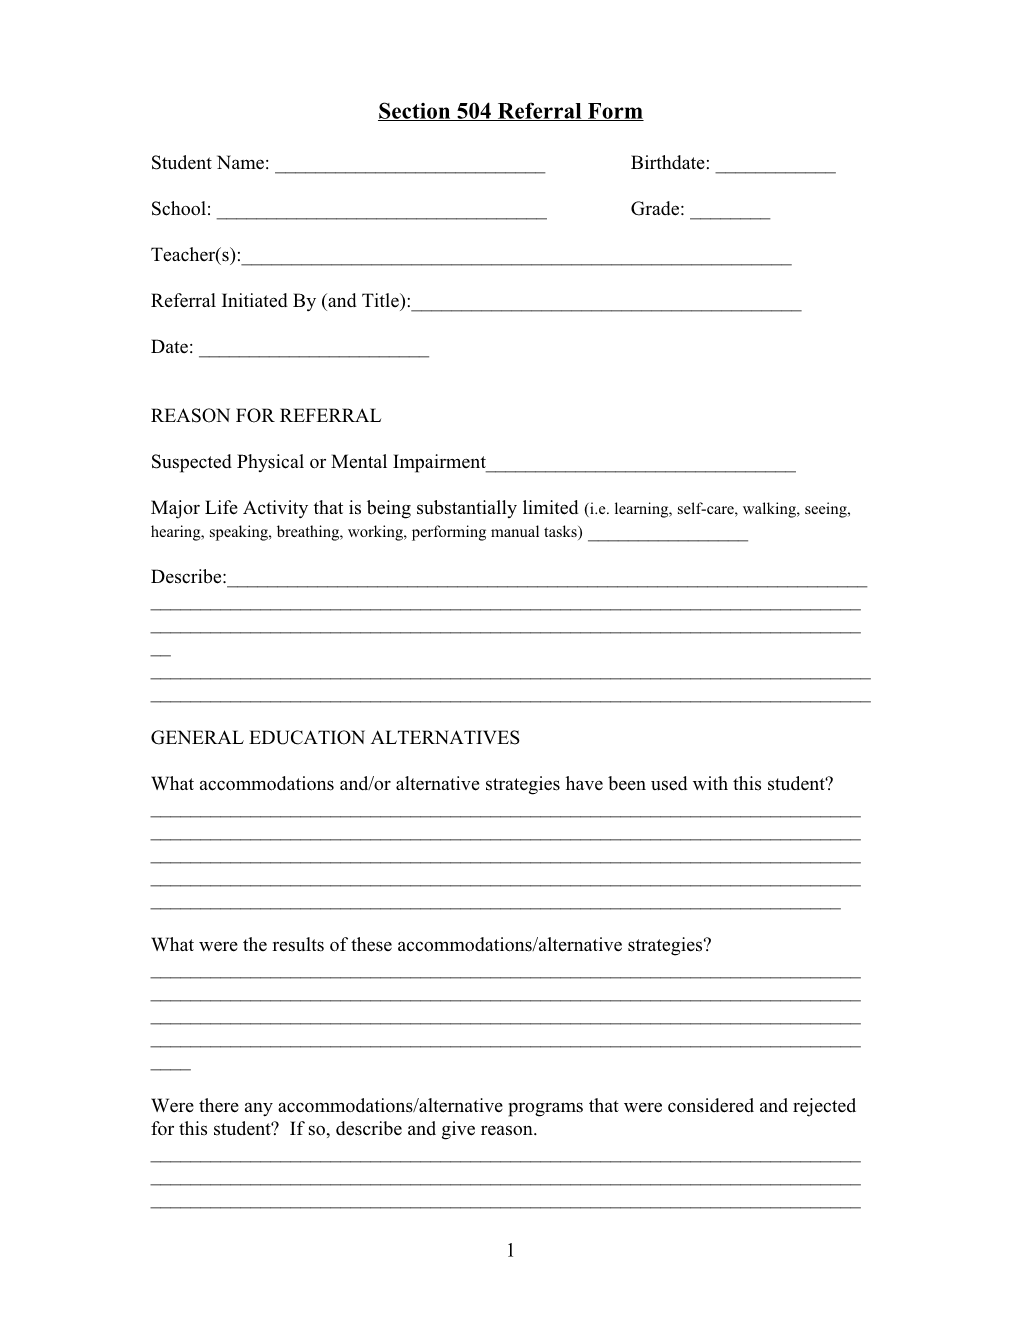 Section 504 Referral Form